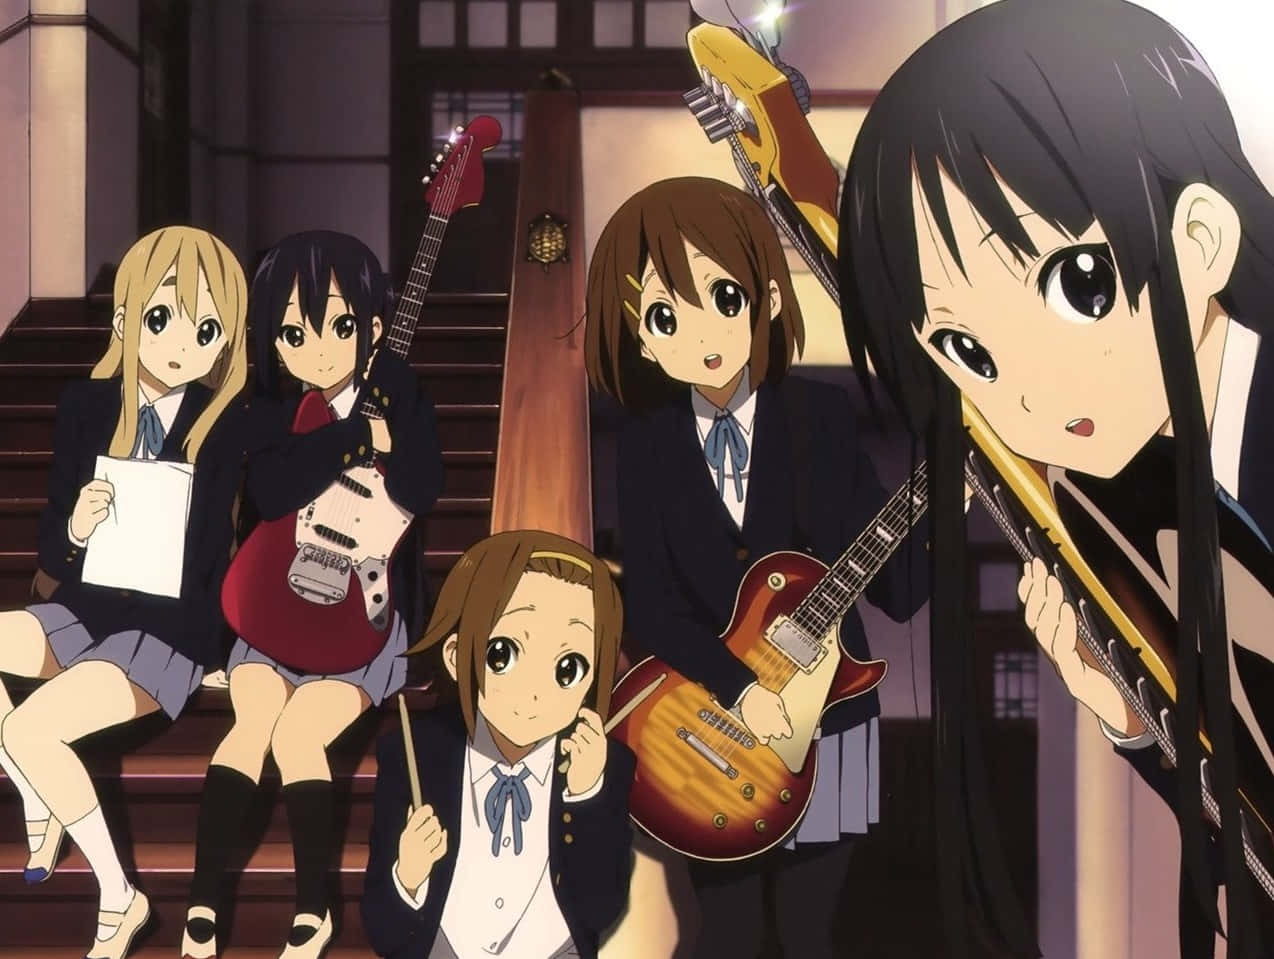 A Group Of Girls In School Uniforms Playing Guitars